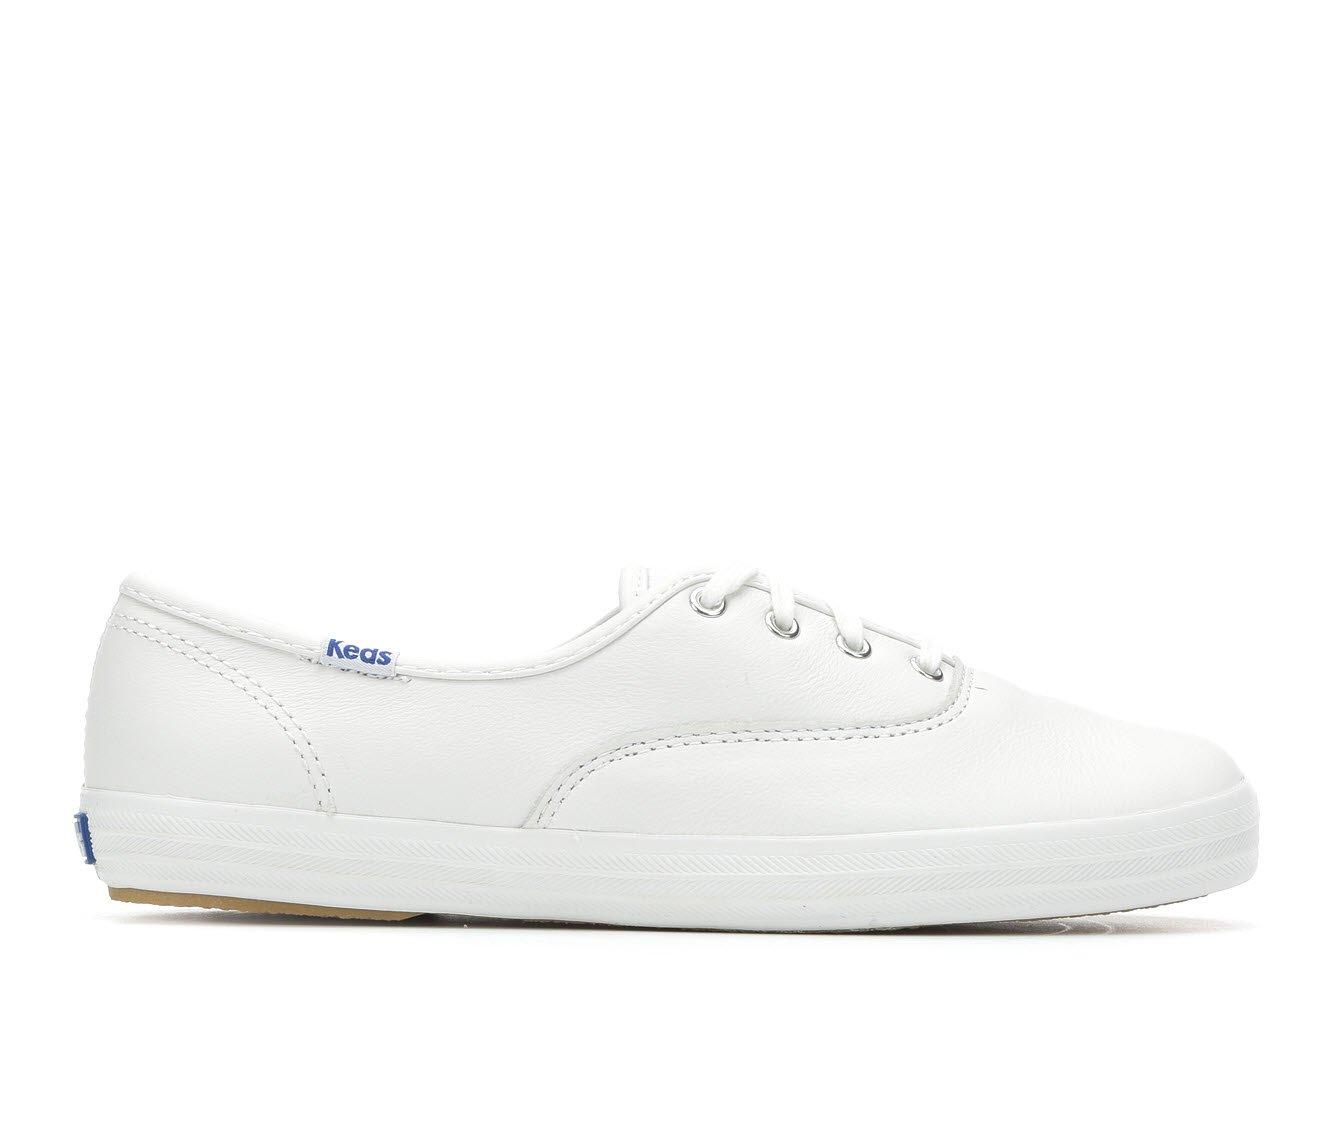 Keds Champion Leather Oxford Sneakers